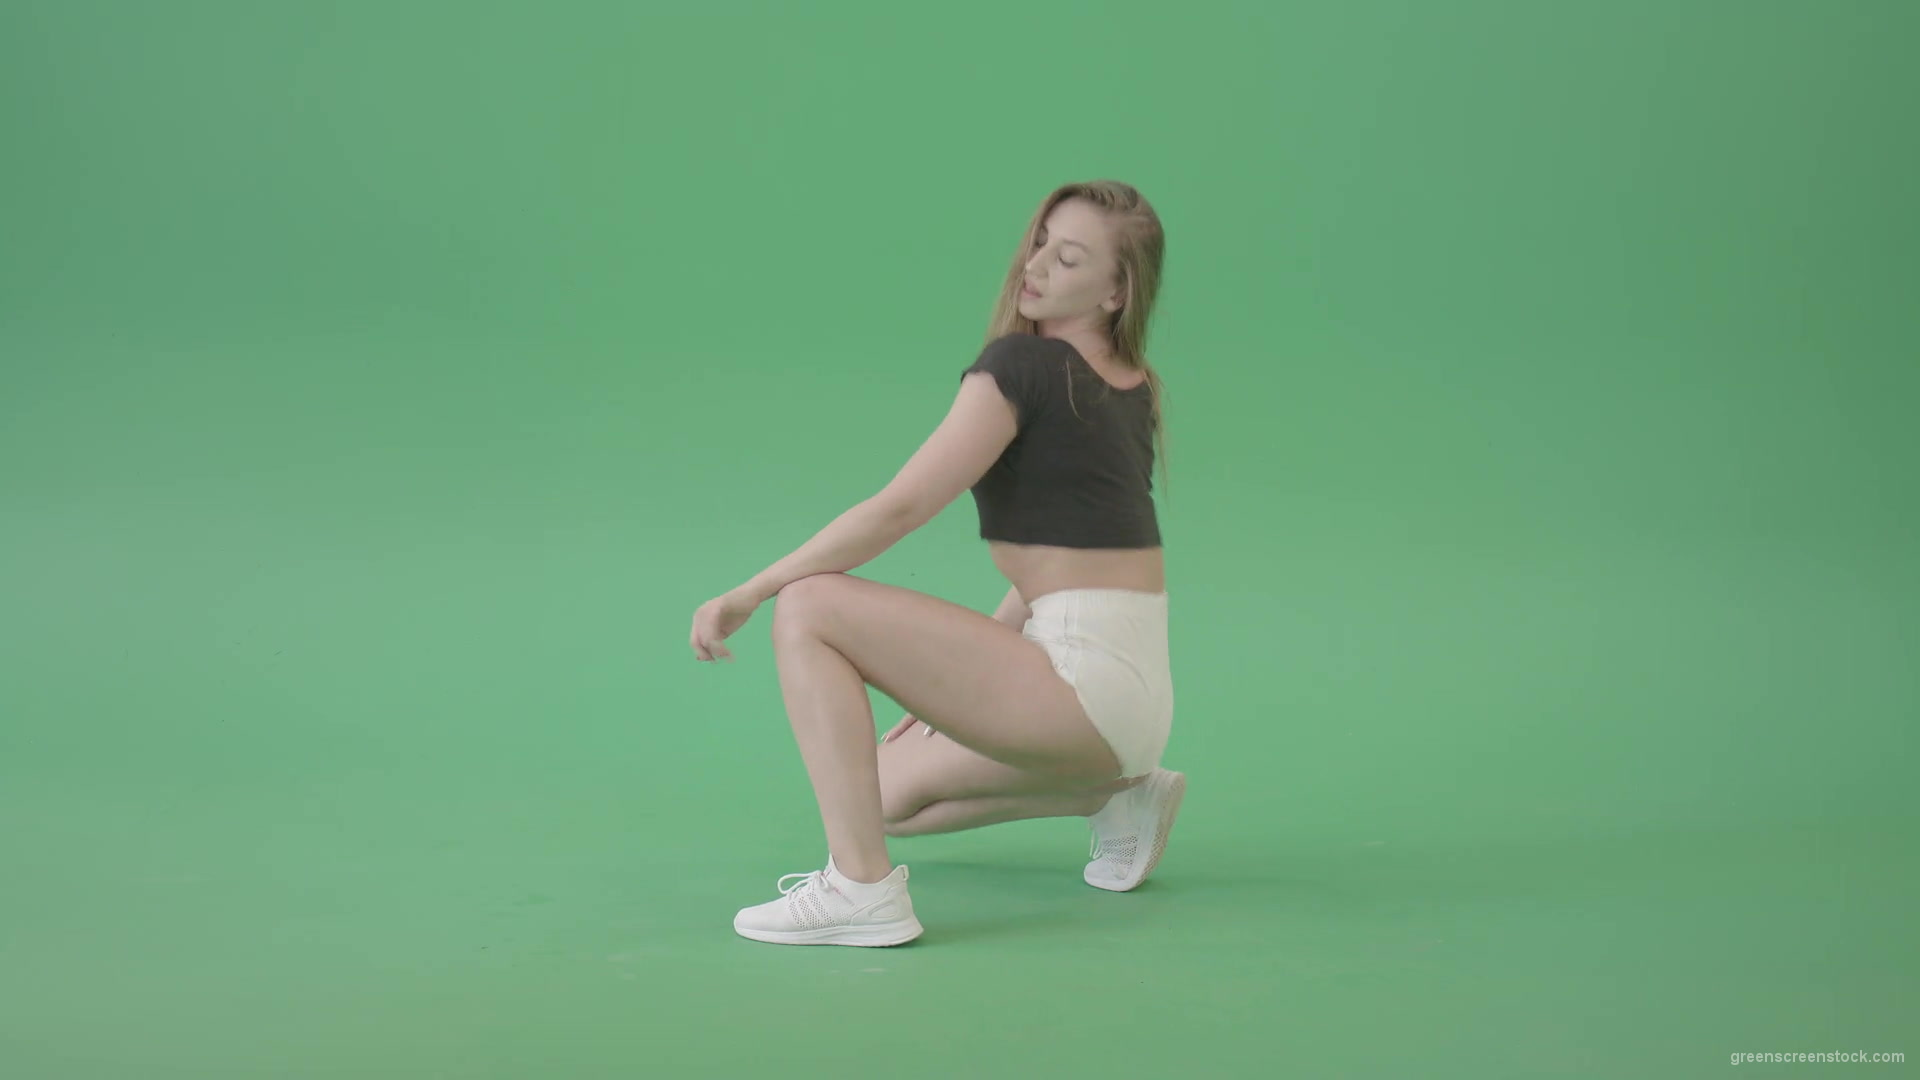 vj video background Girl-in-sitting-pose-twerking-shaking-ass-isolated-on-green-screen-4K-Video-Footage-1920_003